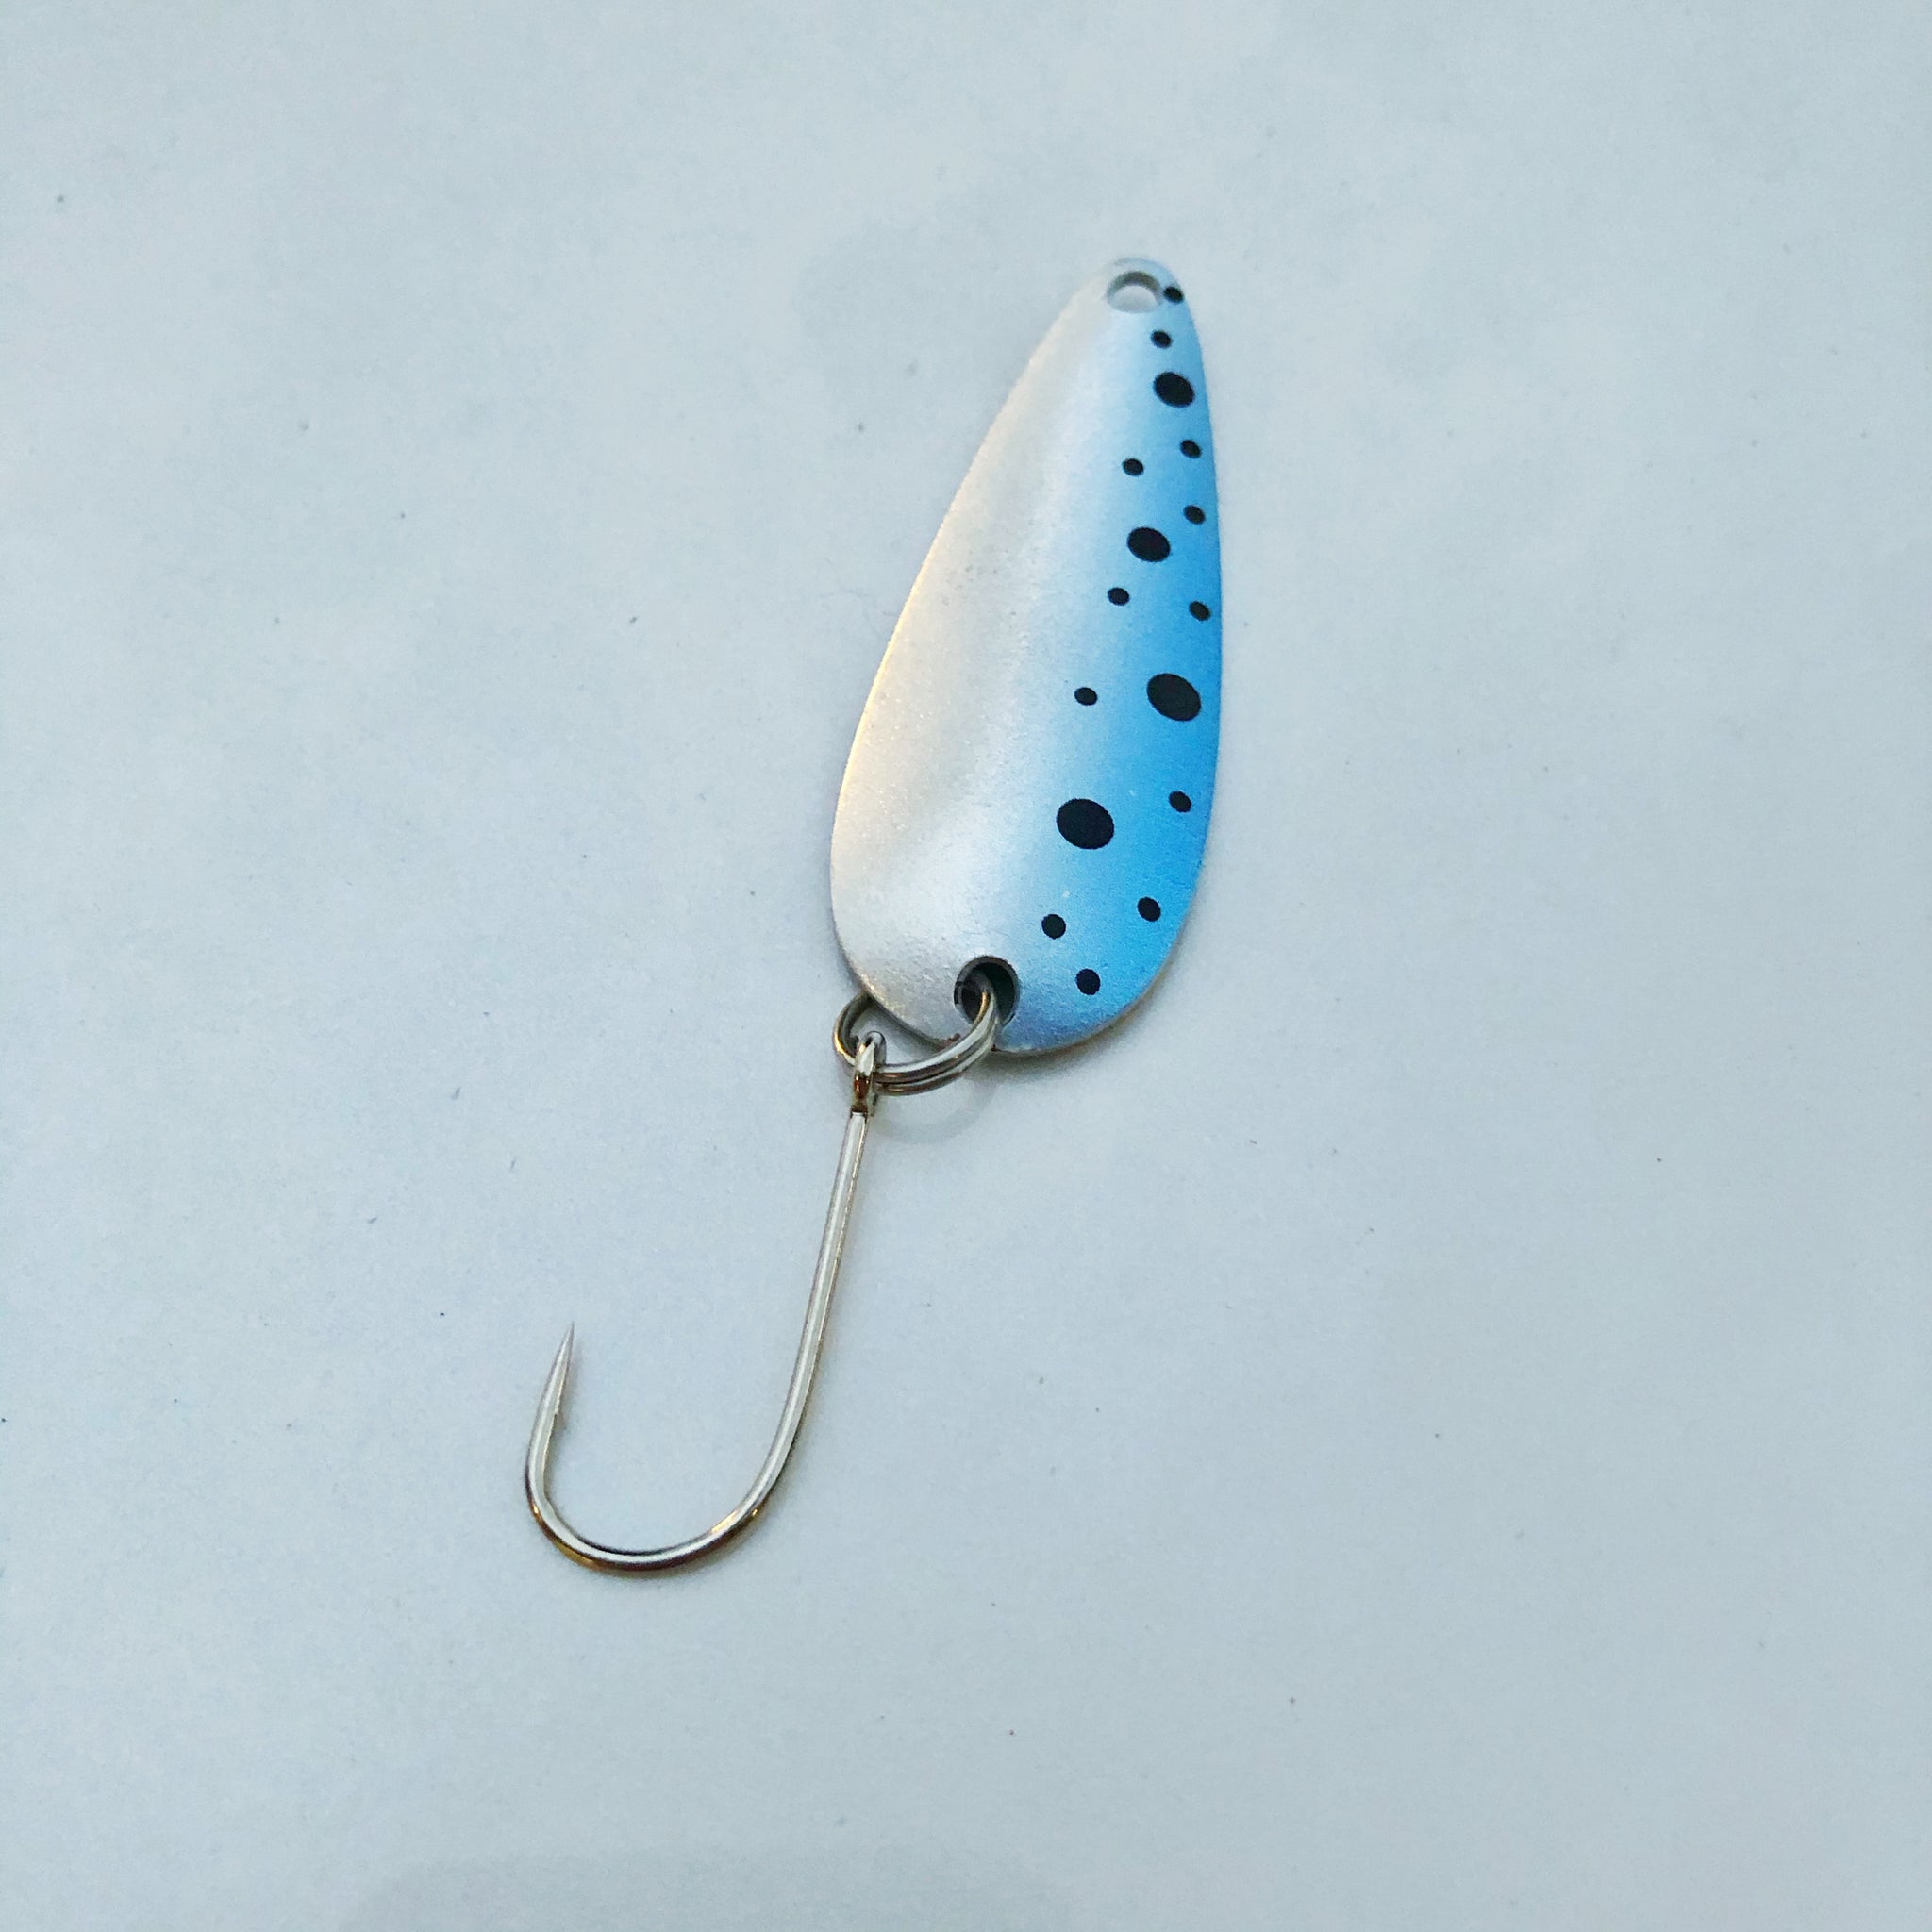 Casting Spoons – Flip Lures